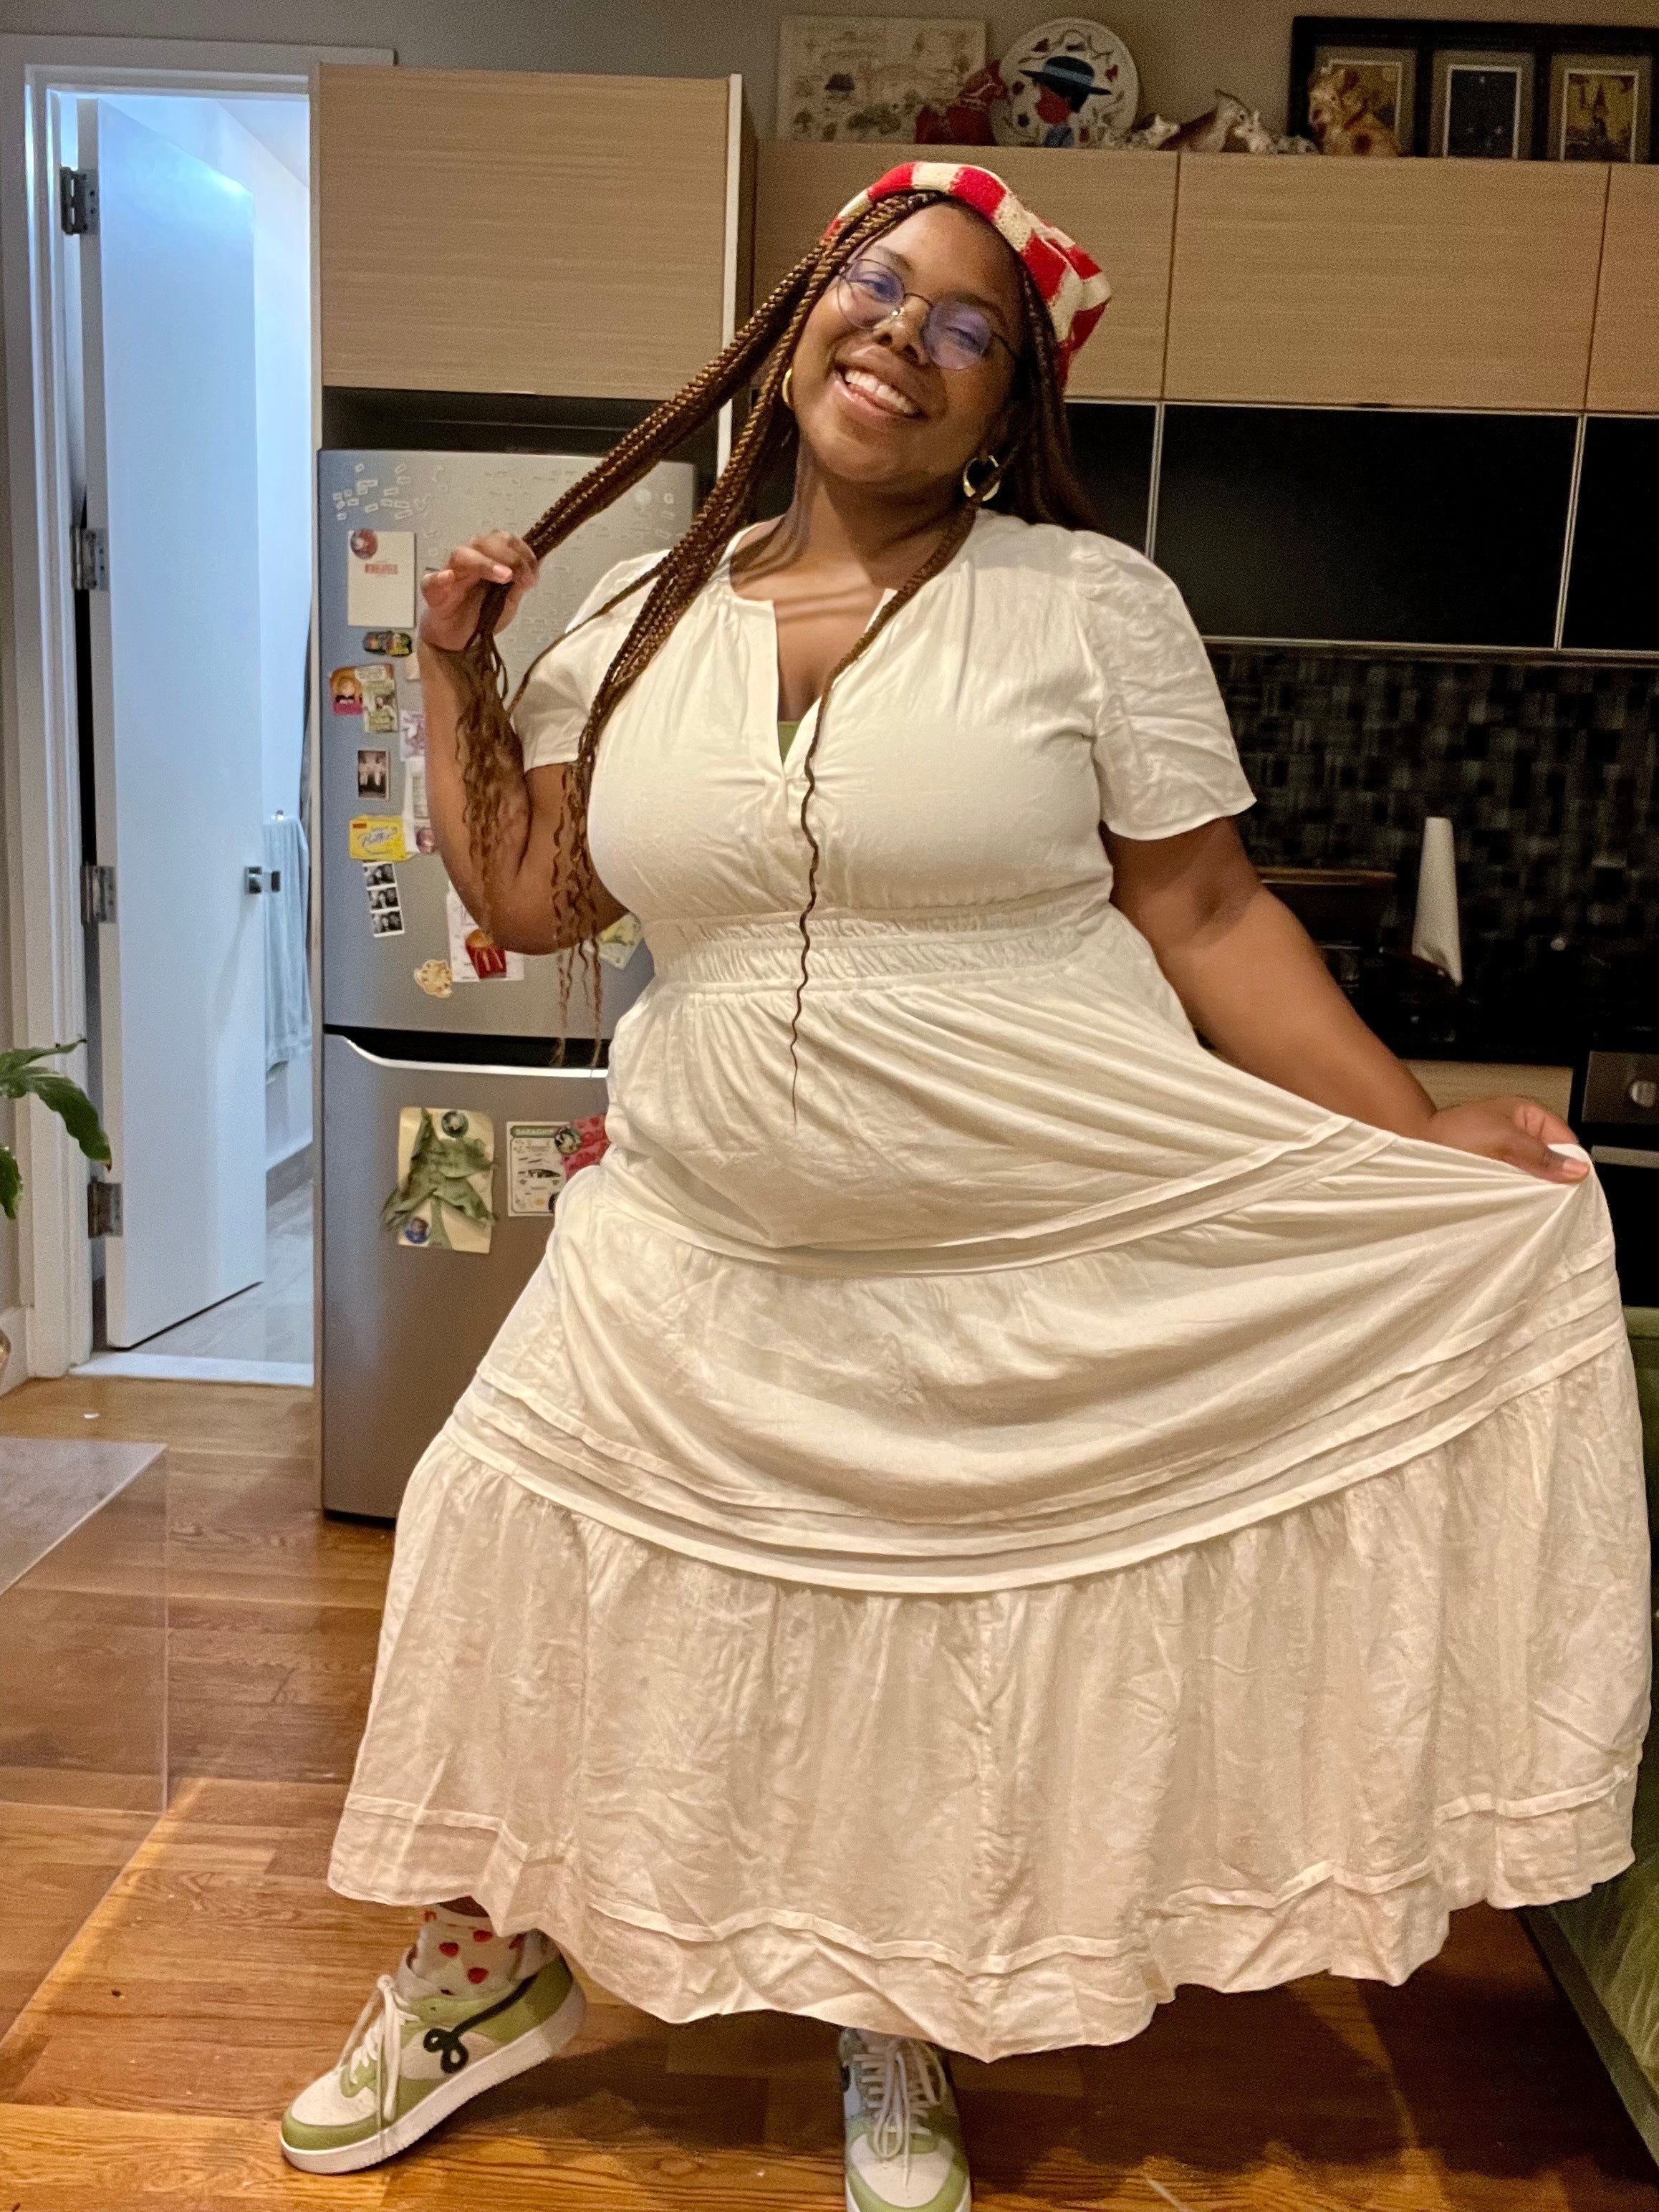 Anthropologie's Somerset Maxi Dress Review 2022